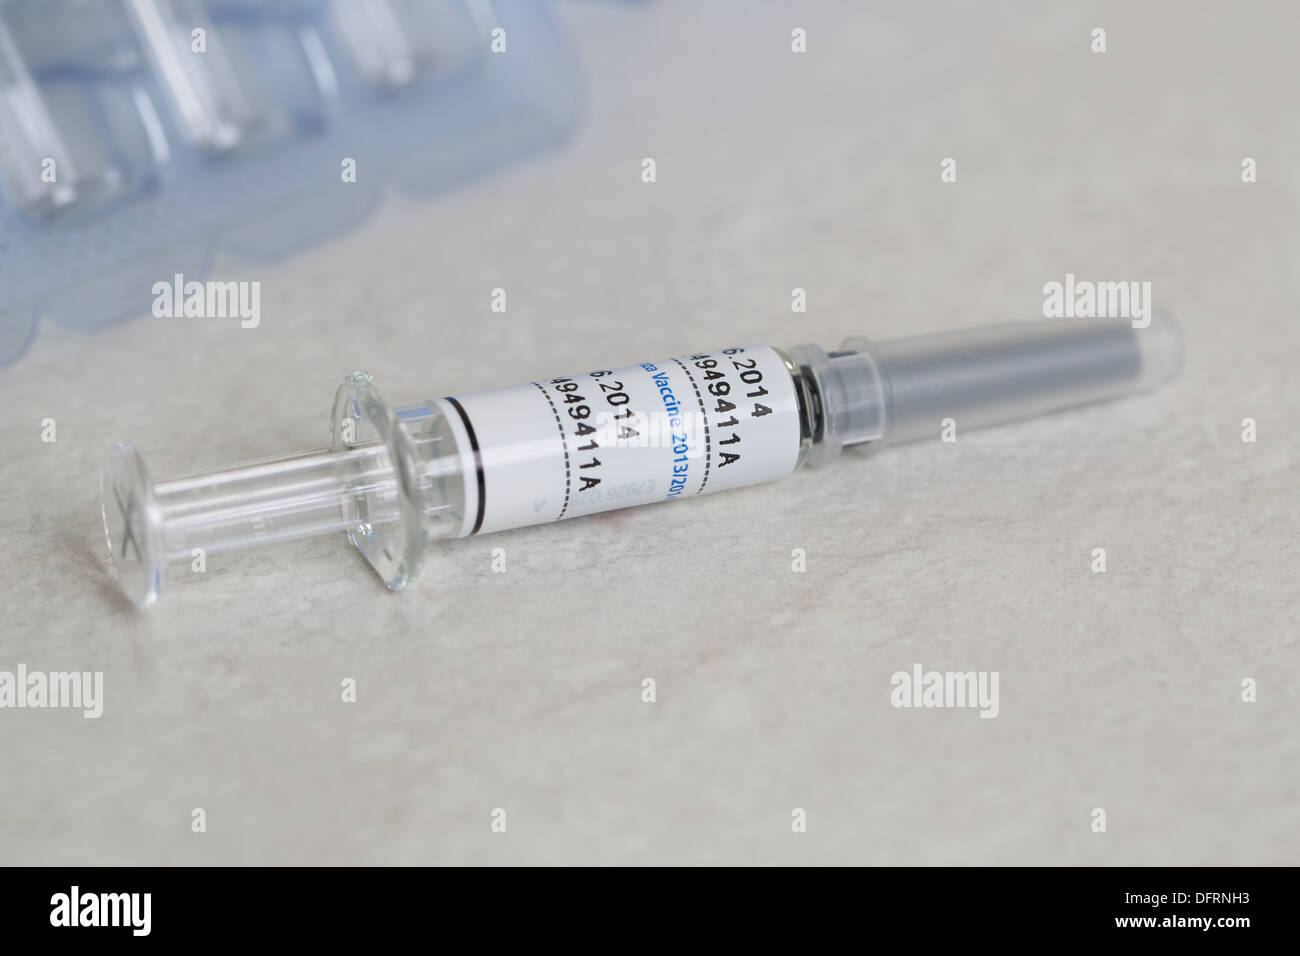 Flu vaccine 2013/2014 packaging packs and syringes for winter flu jab innoculation Stock Photo